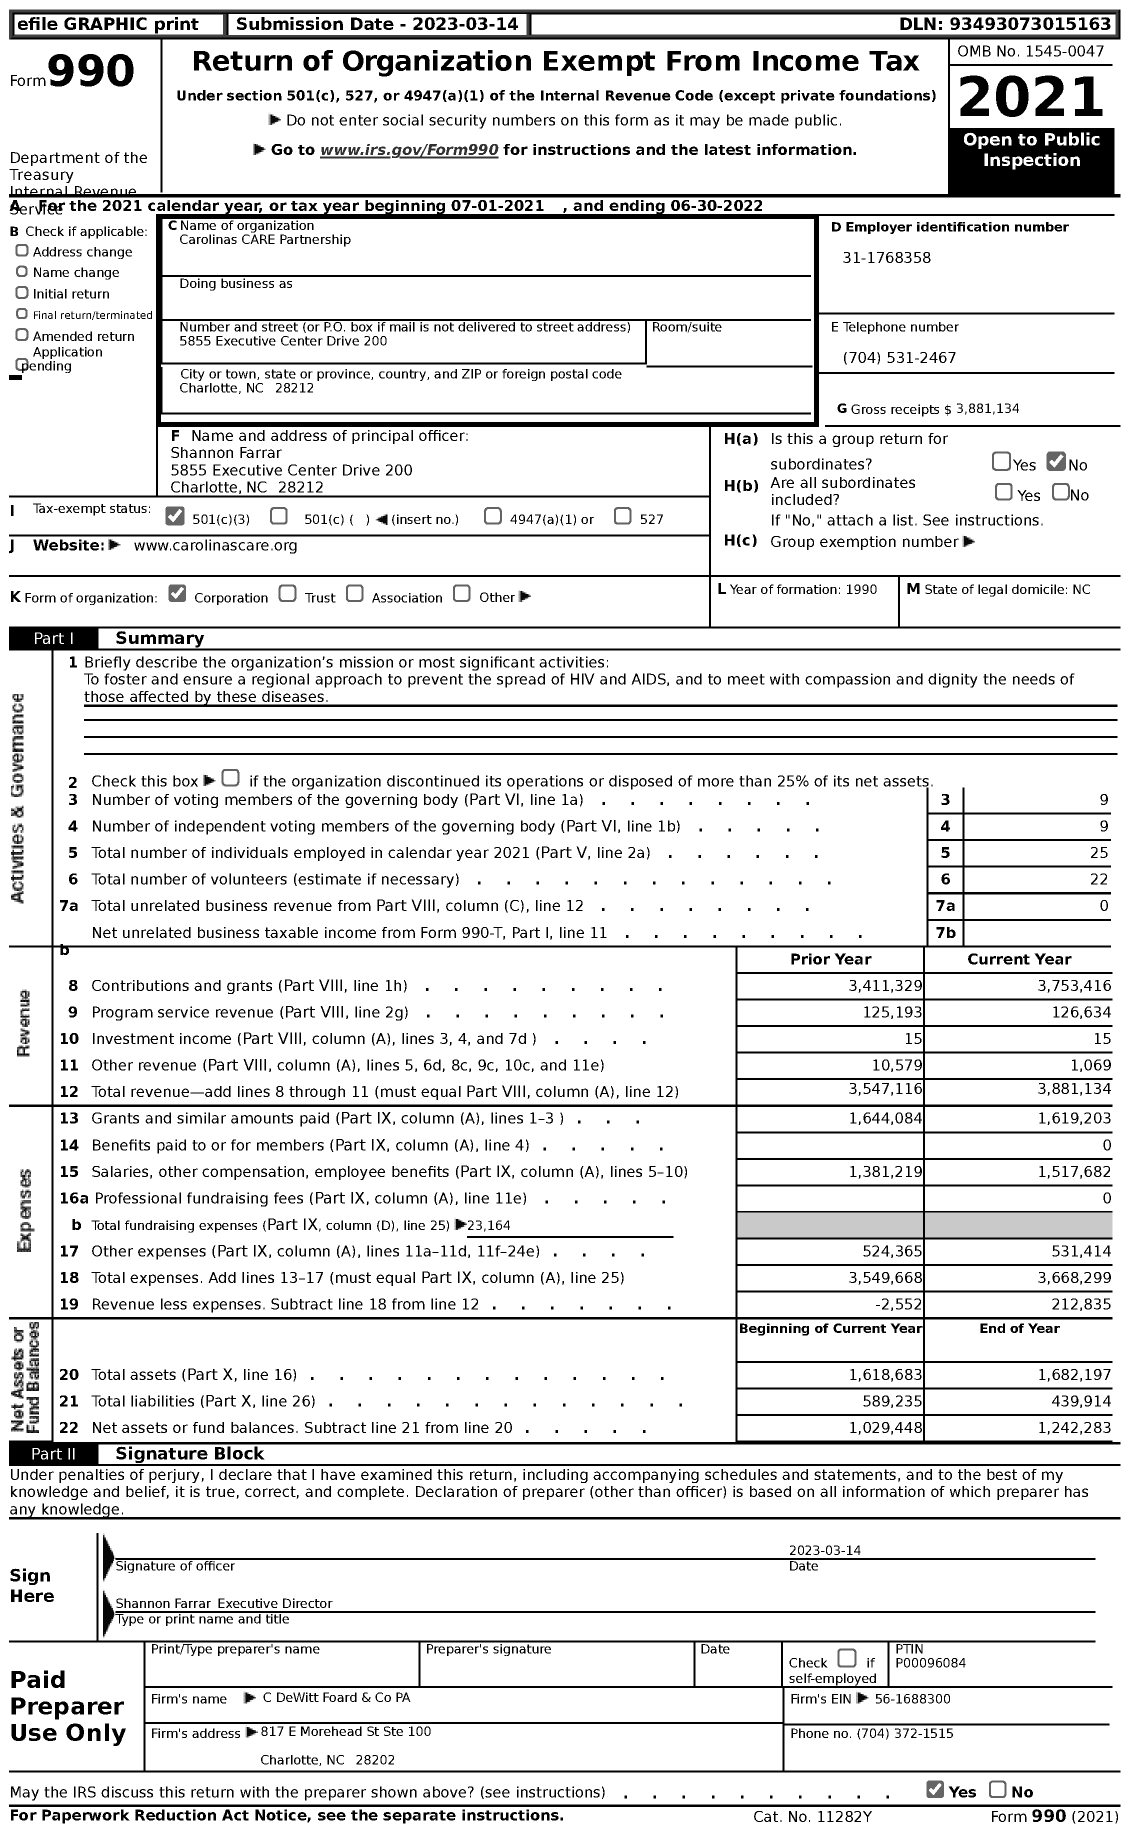 Image of first page of 2021 Form 990 for Carolinas CARE Partnership